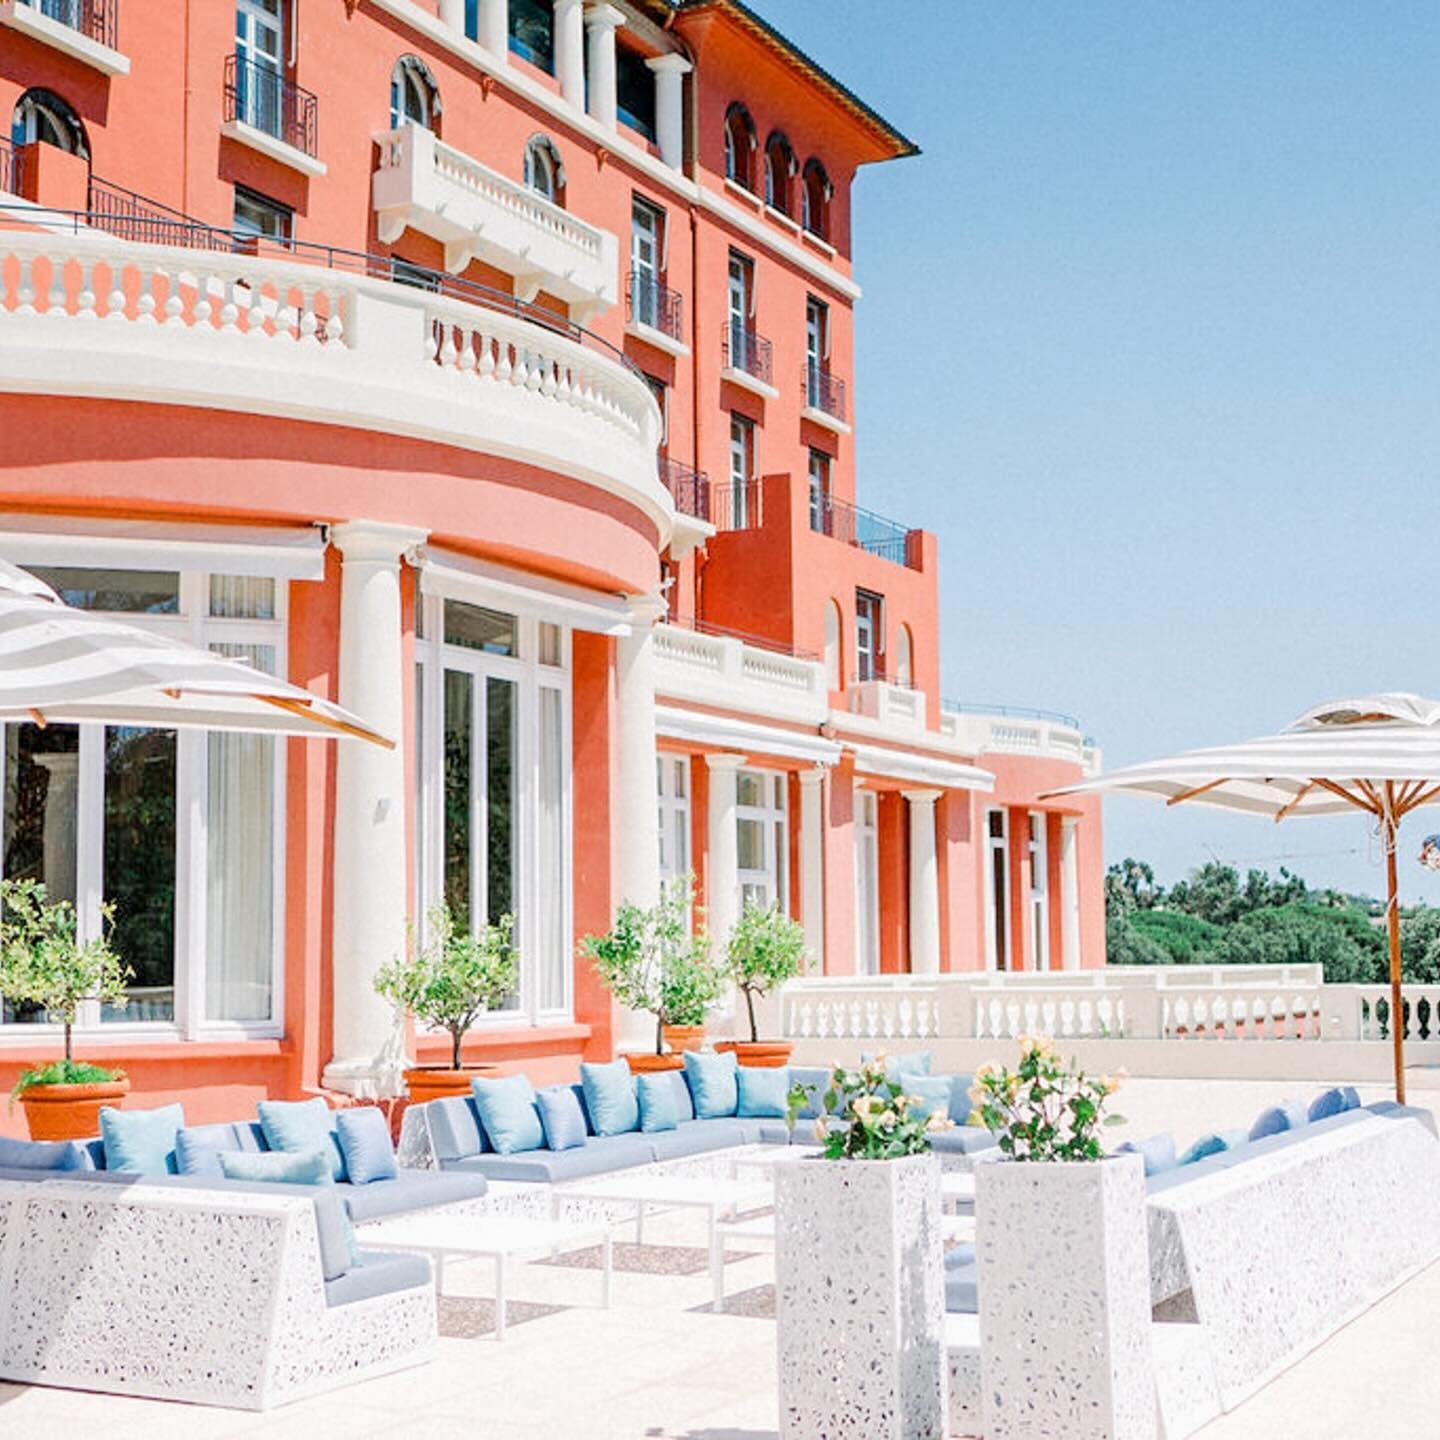 Celebrate under the Riviera sun! Our largest outdoor space is the prime location boasting breathtaking views over our garden and the Bay of Saint-Tropez. It is the ultimate spot for unforgettable events. Picture-perfect against our iconic terracotta 